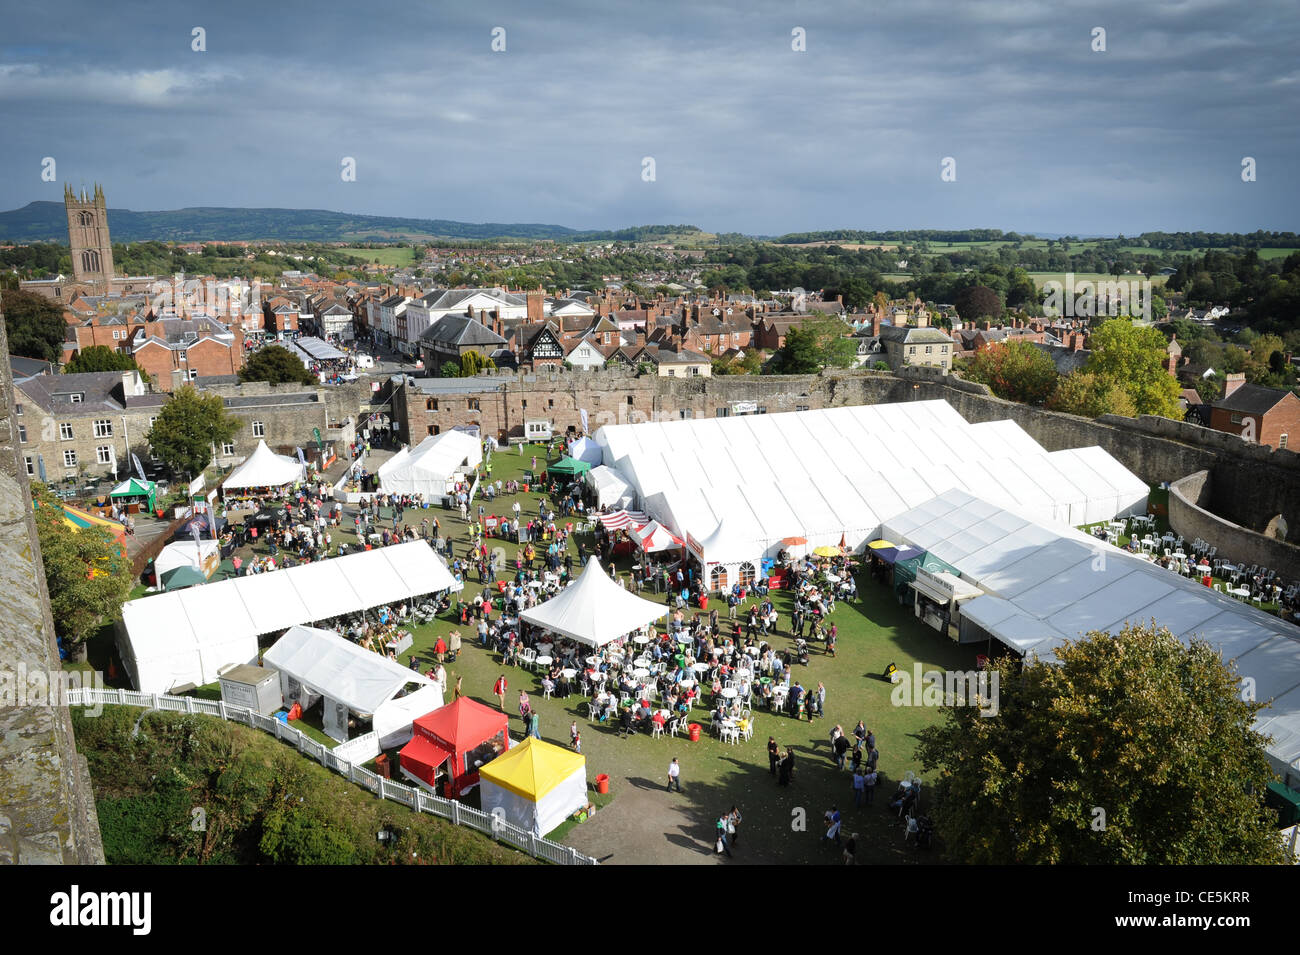 General view of the Ludlow Food Festival, taken from the top of Ludlow castle & looking towards the town centre & Clee Hill Stock Photo